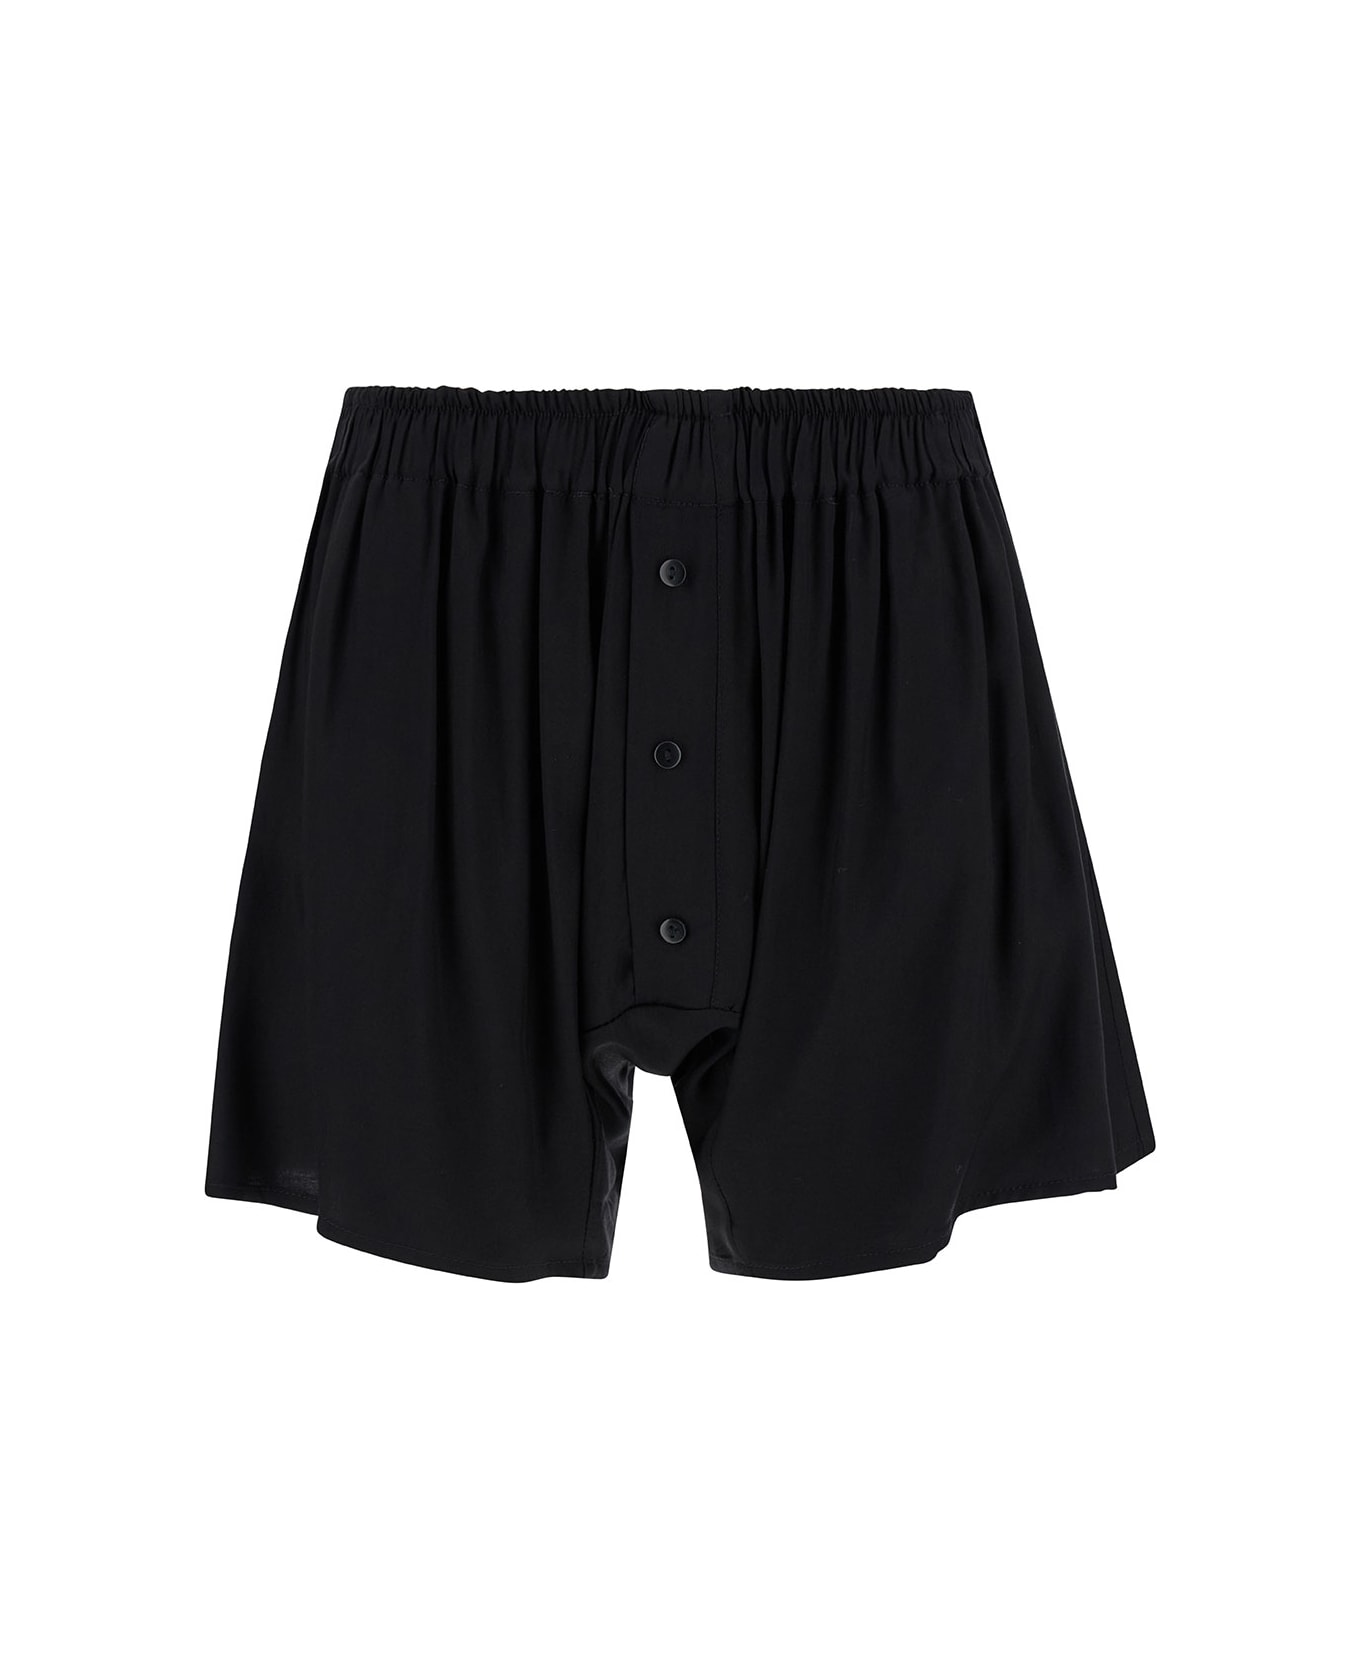 Federica Tosi Black Bermuda Shorts With Buttons In Viscose Woman - BLACK ショートパンツ